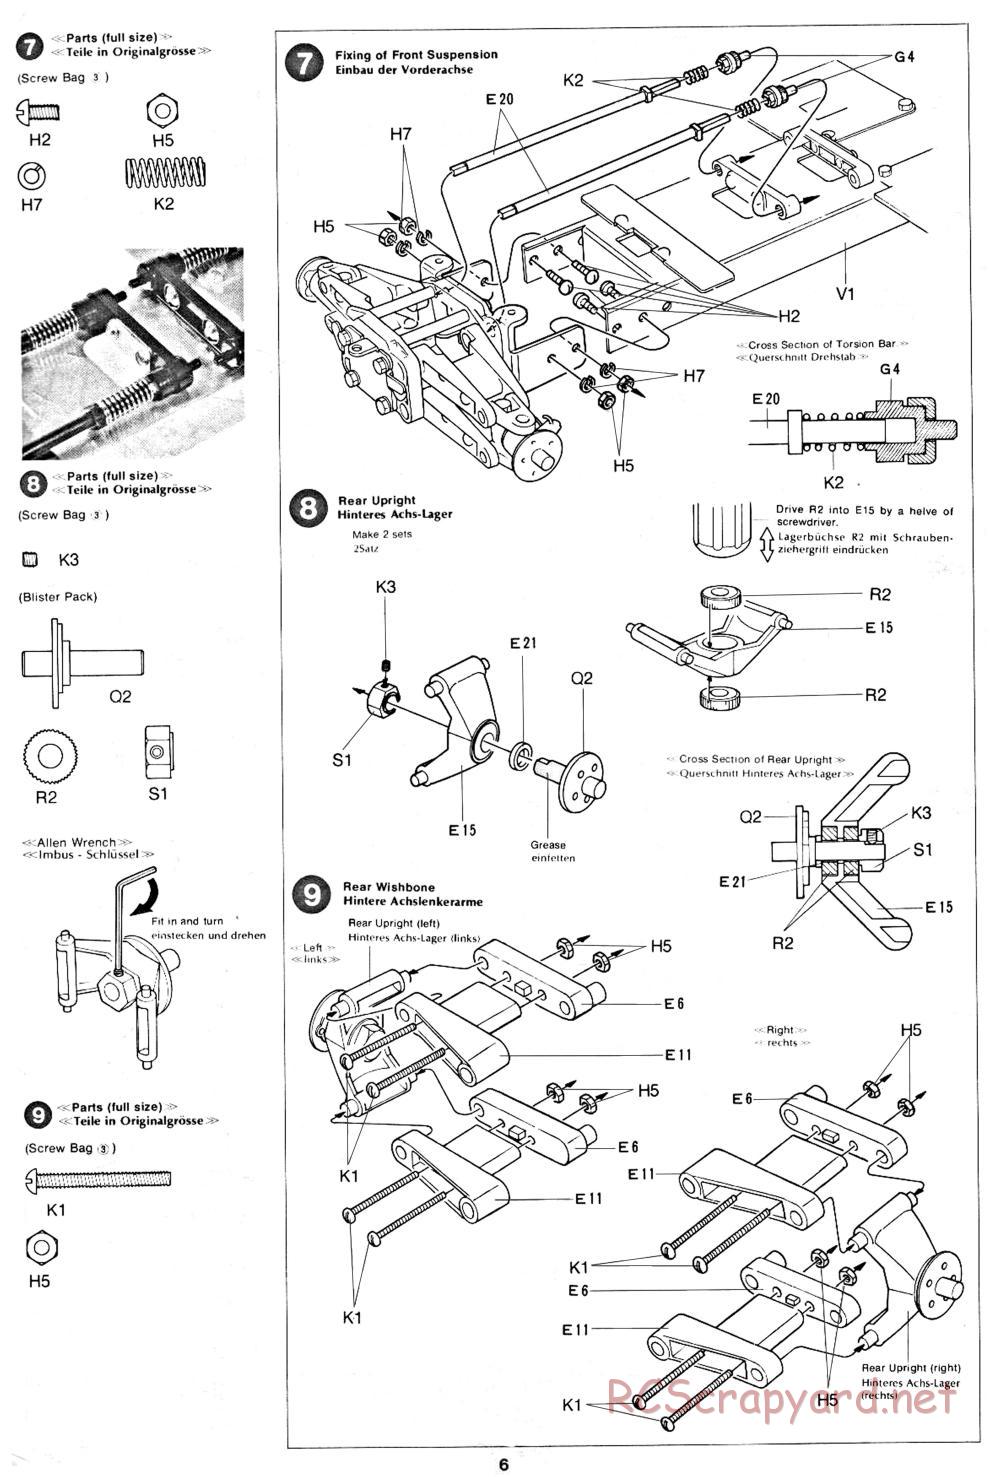 Tamiya - XR311 Combat Support Vehicle (1977) Chassis - Manual - Page 6